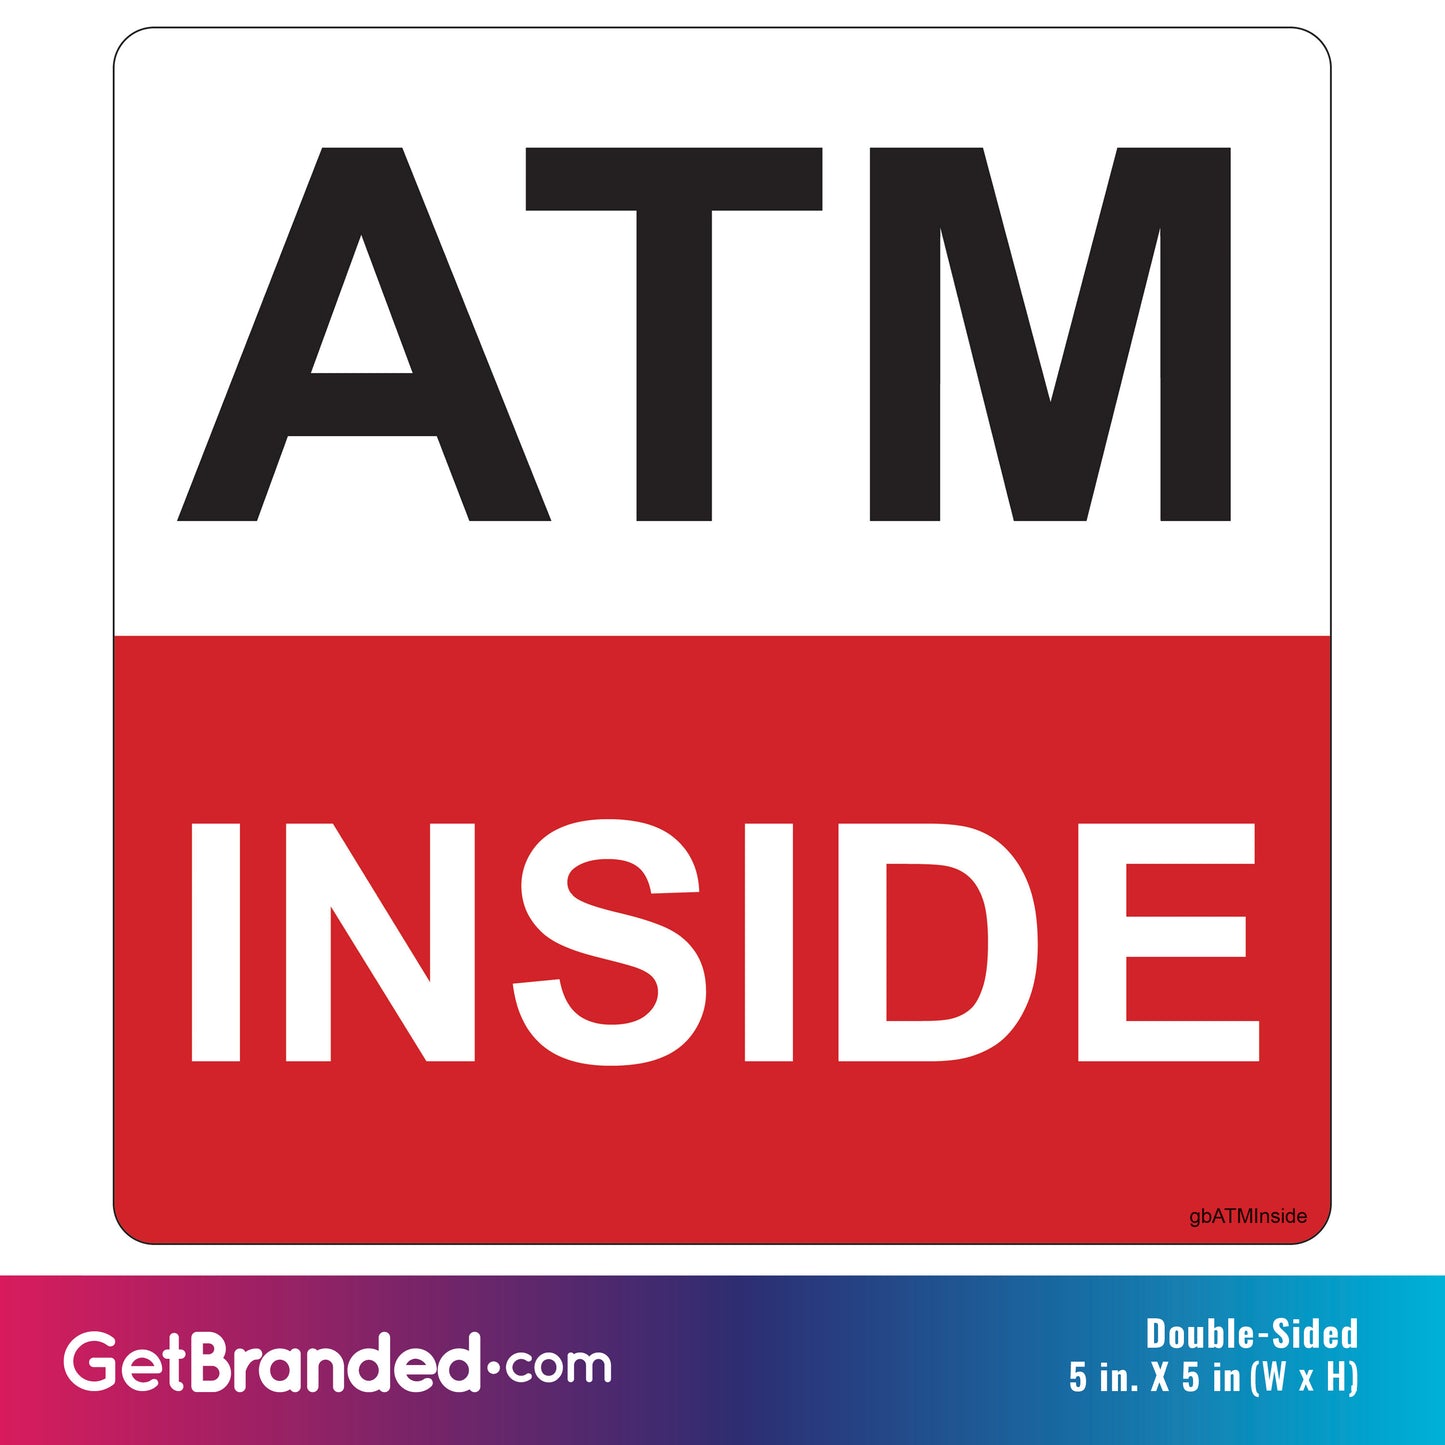 ATM Inside Decal size guide.